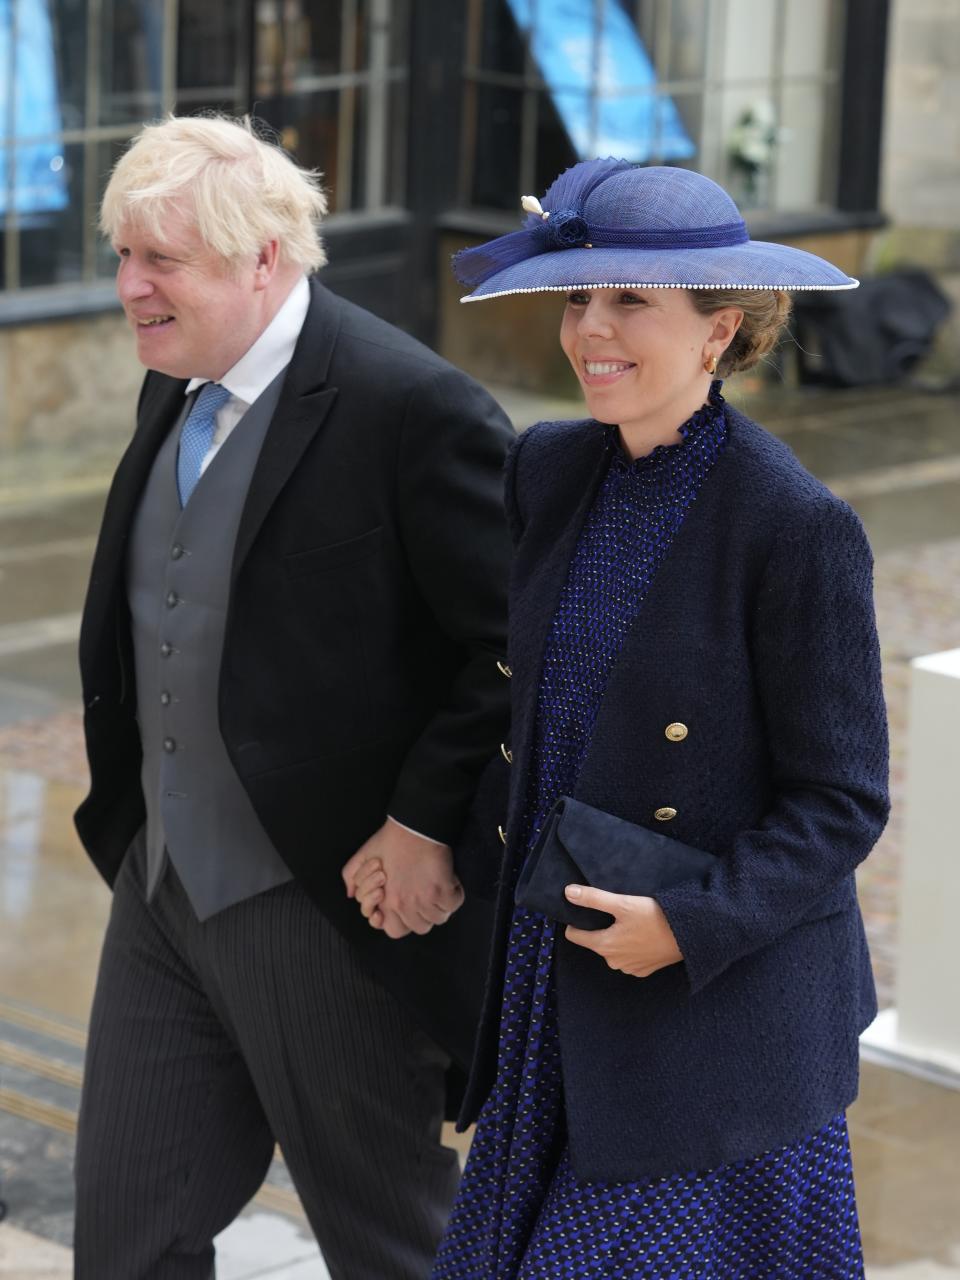 Former British Prime Minister Boris Johnson and and Carrie Johnson arrive ahead of the Coronation of King Charles III and Queen Camilla on May 6, 2023 in London, England.